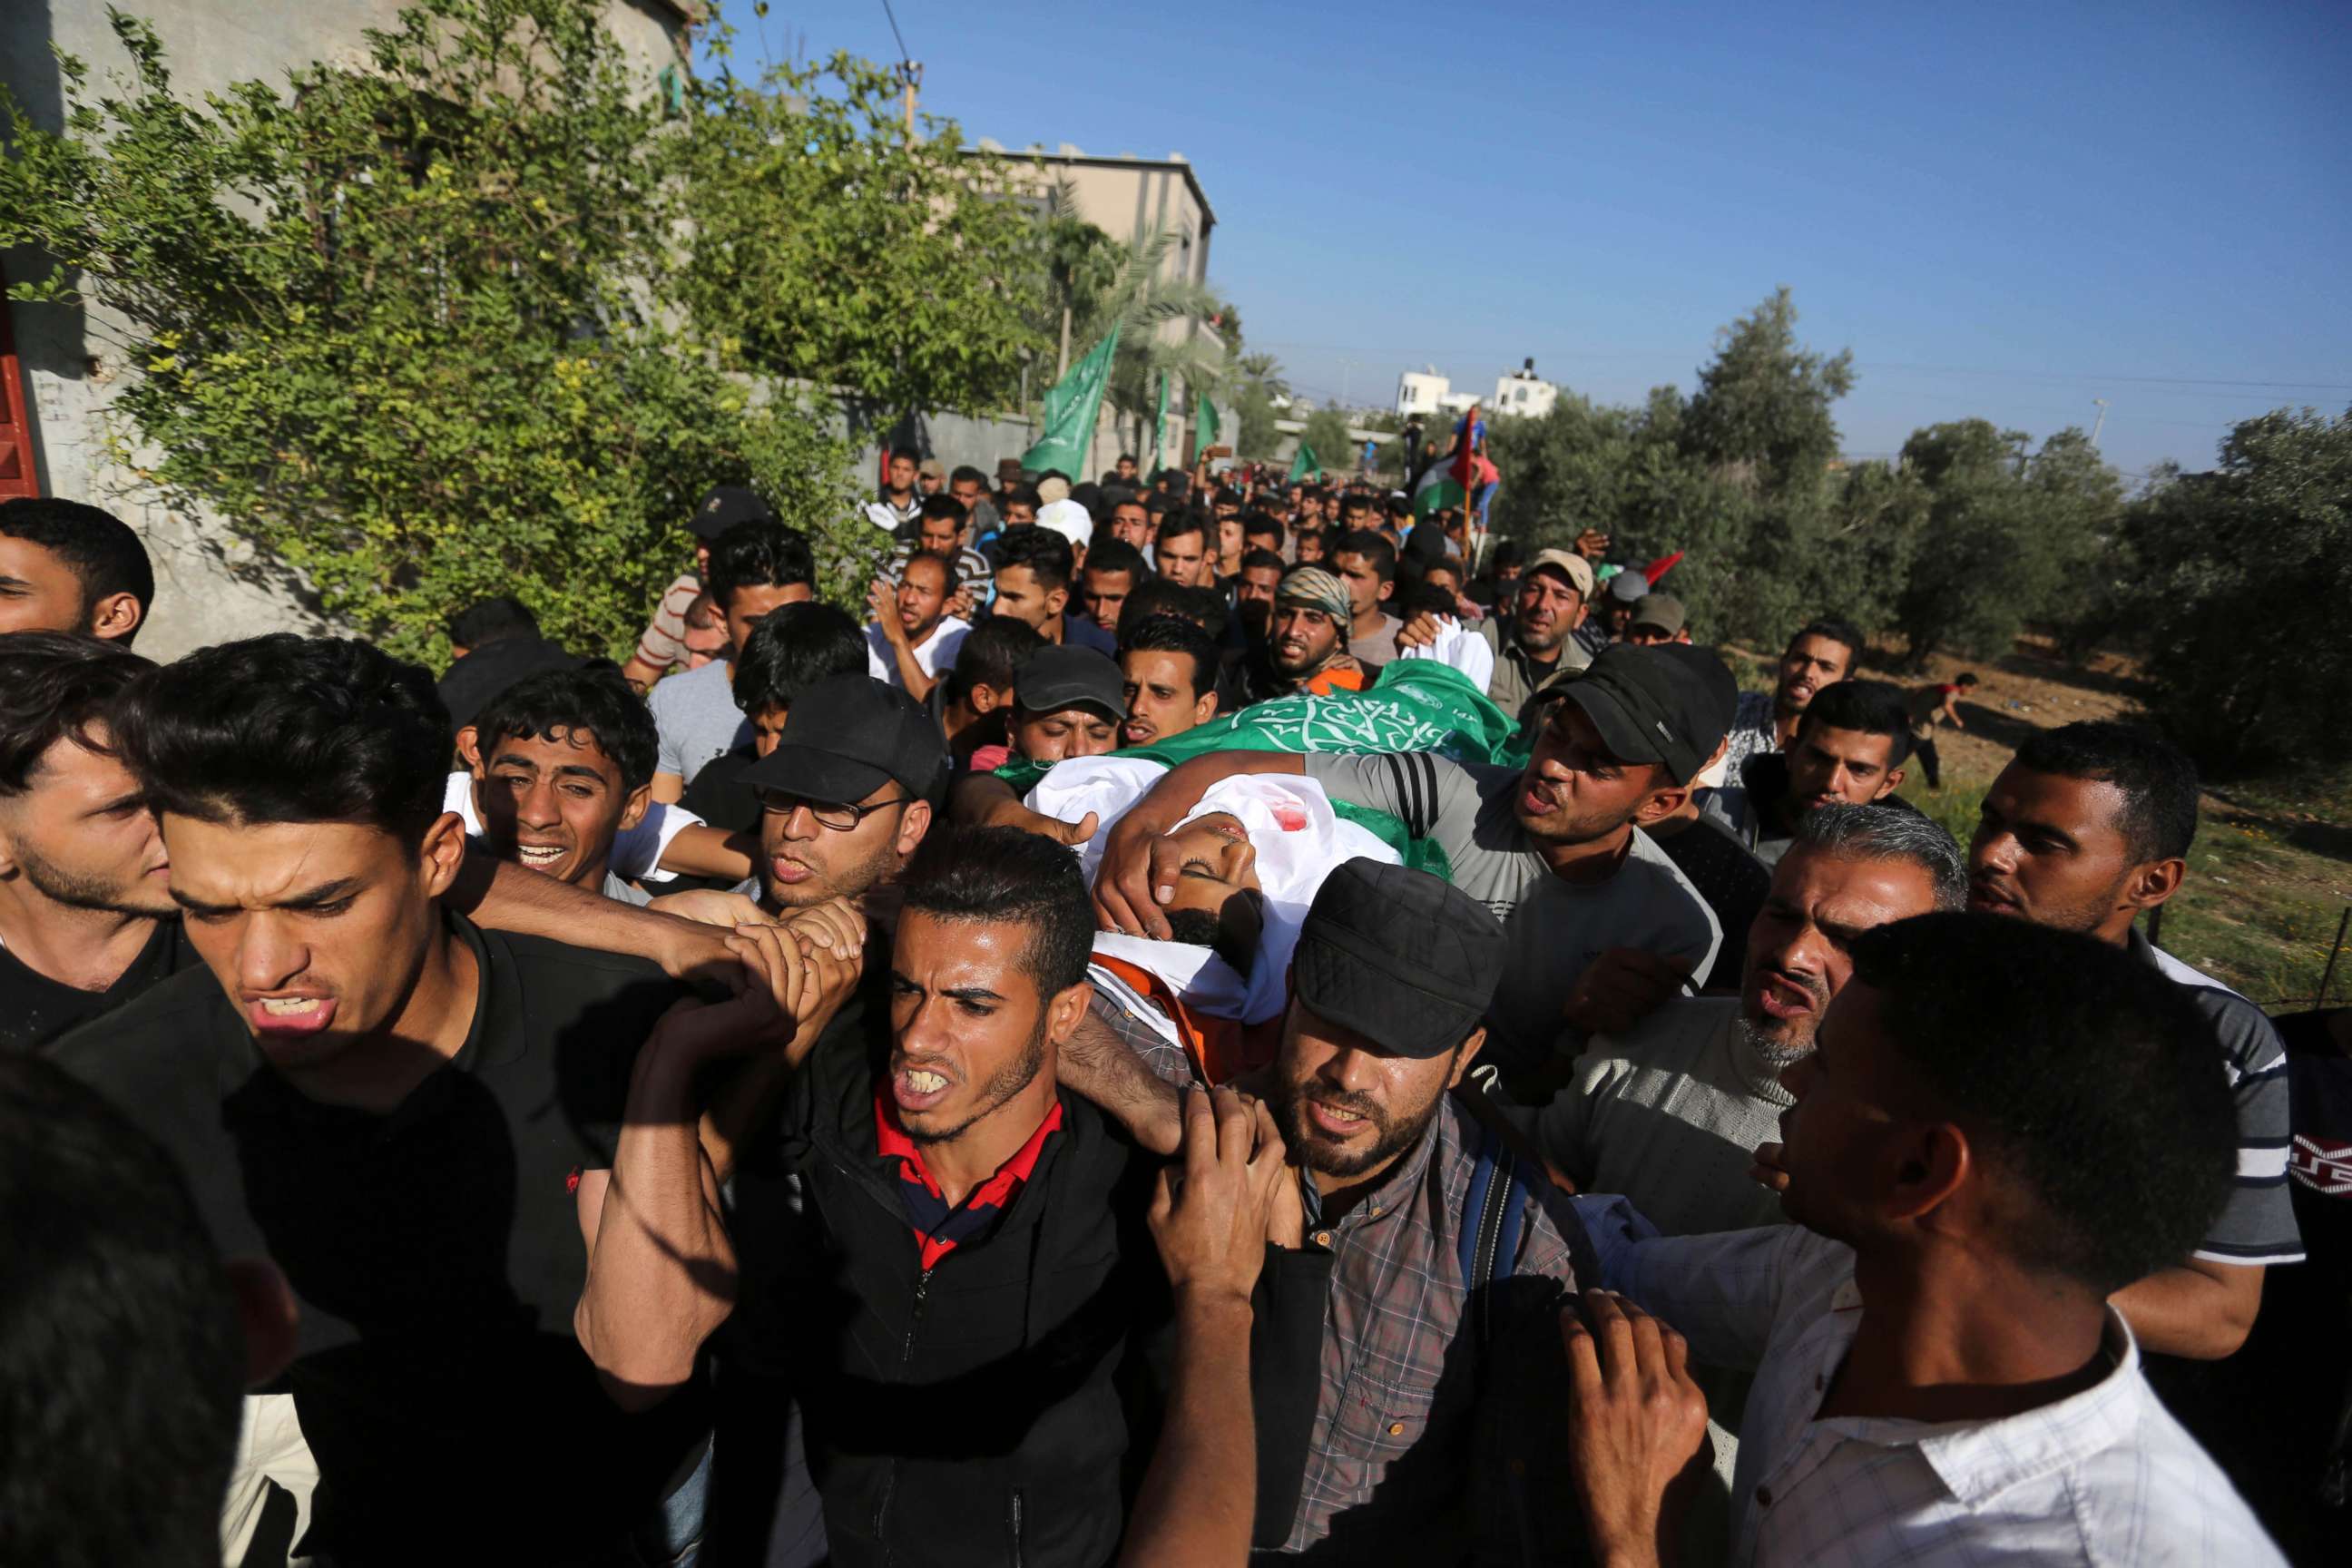 Mourners carry the body of Palestinian Mahmoud Abu Taima, who was killed by Israeli troops during clashes in a tent city protest where Palestinians demanded the right to return to their homeland, May 14, 2018, in the Gaza Strip.